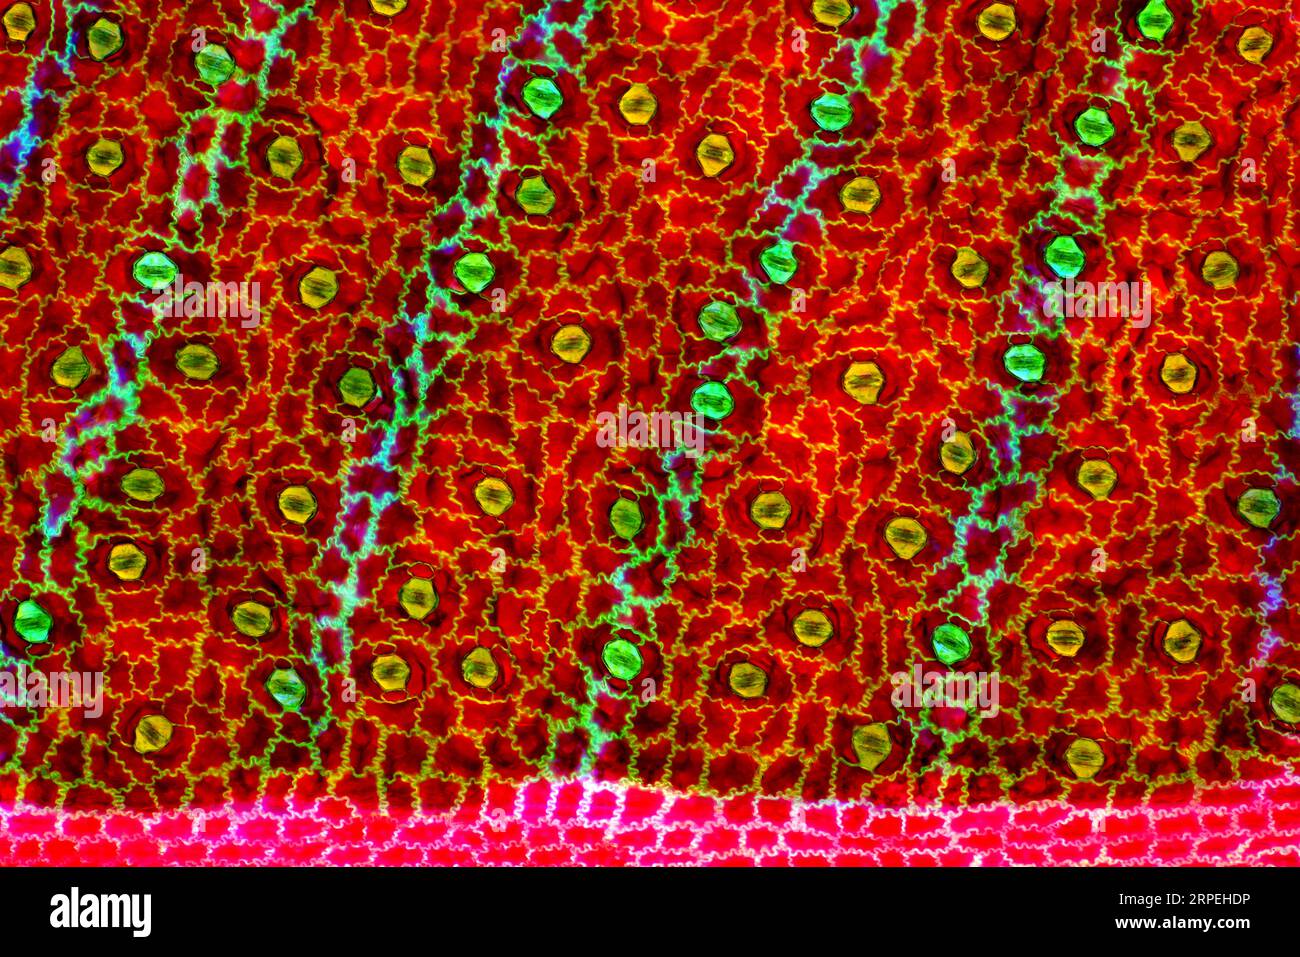 The image presents  stomata in Stromanthe sp. leaf epidermis, photographed through the microscope in polarized light at a magnification of 100X Stock Photo